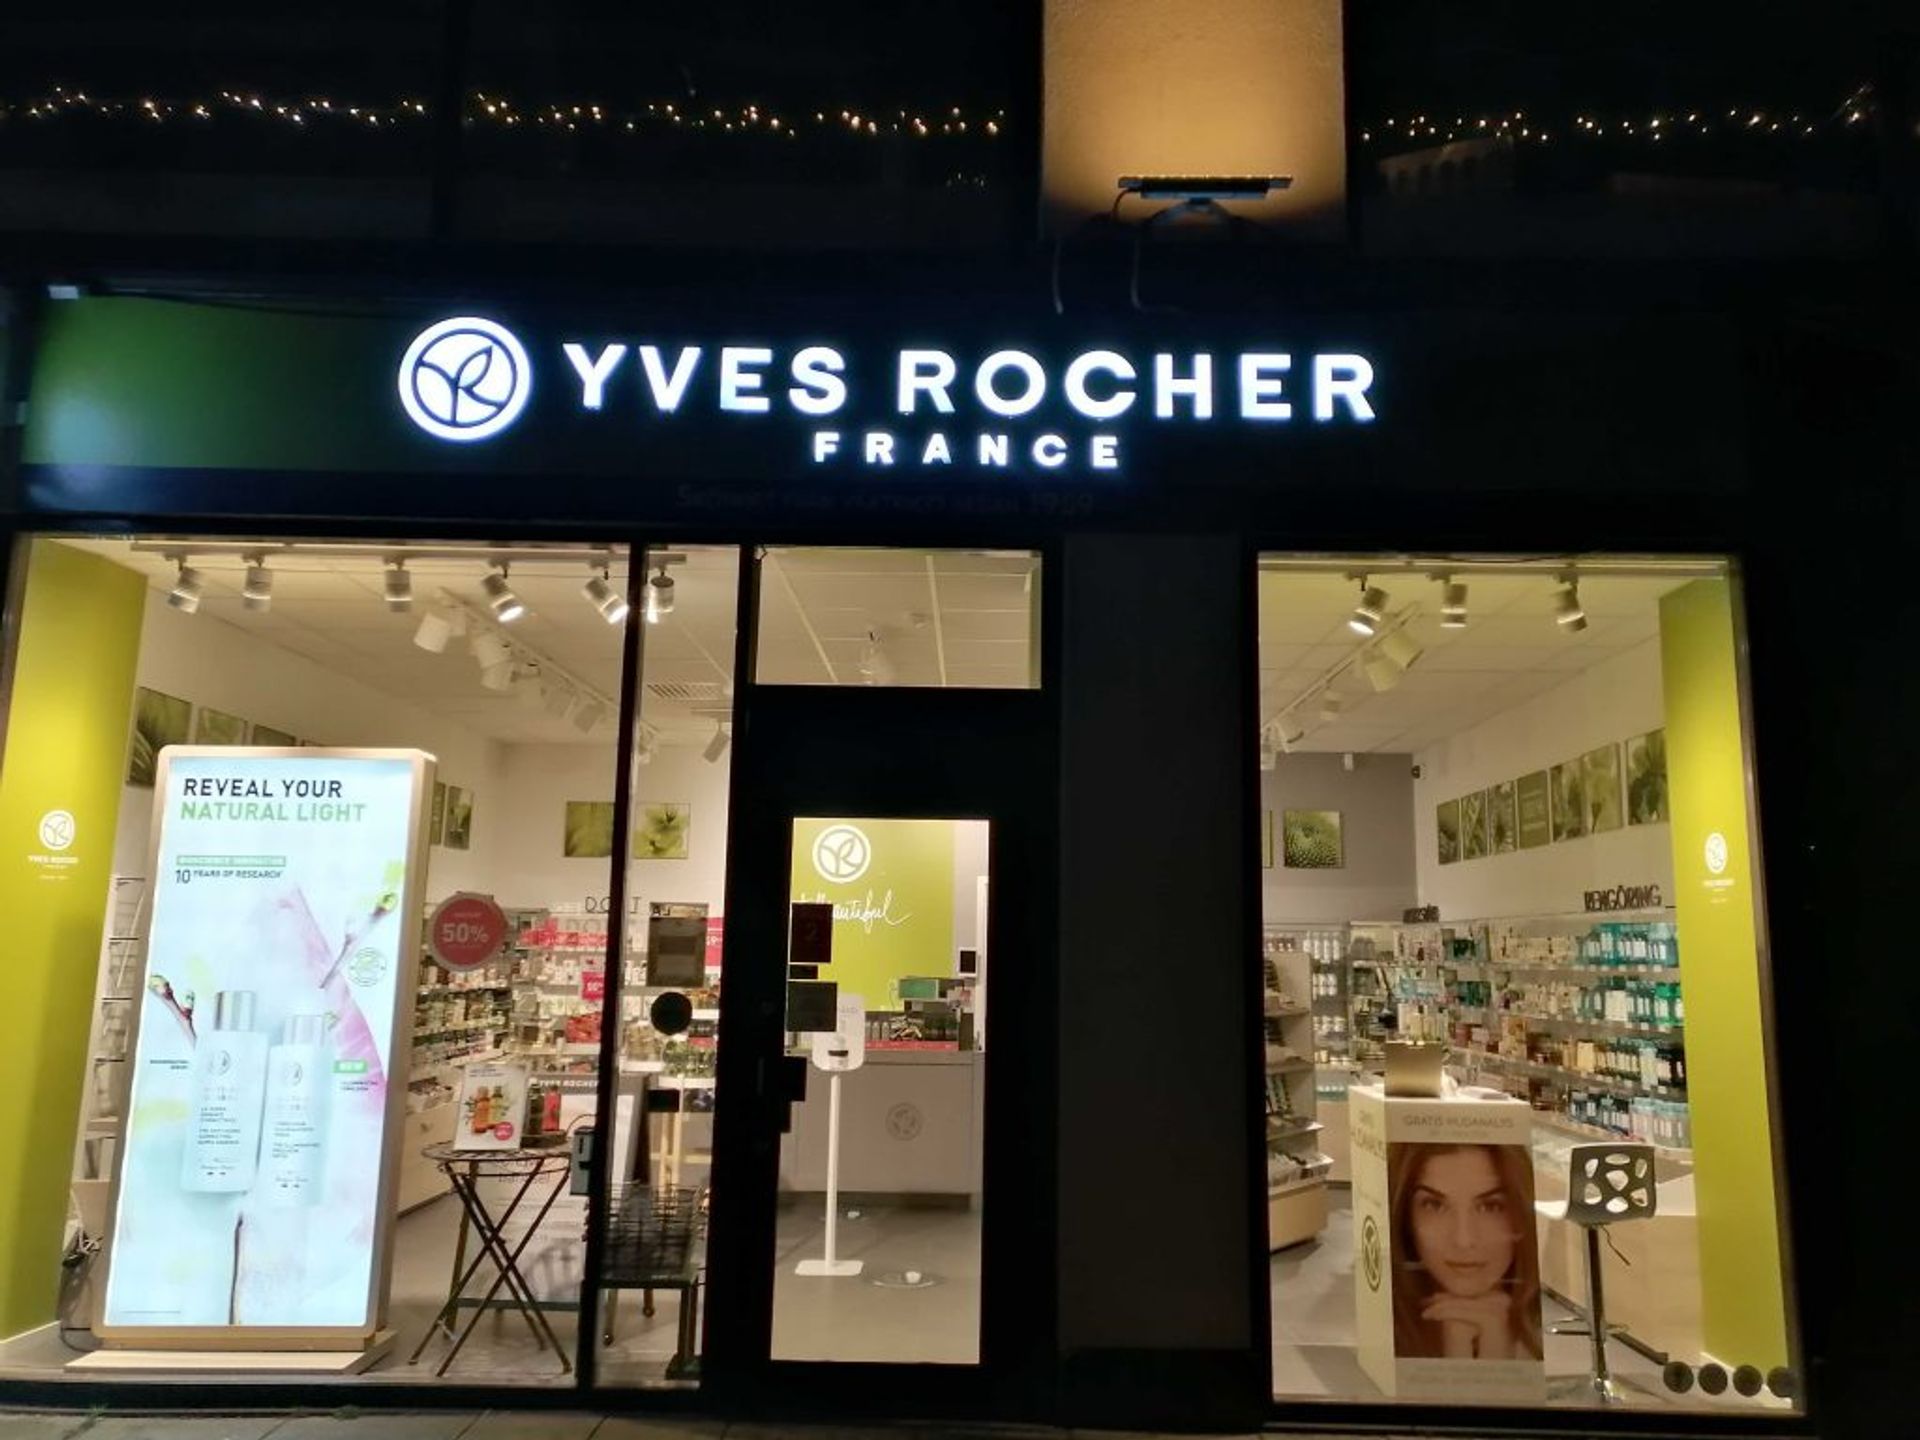 Yves Rocher from outside